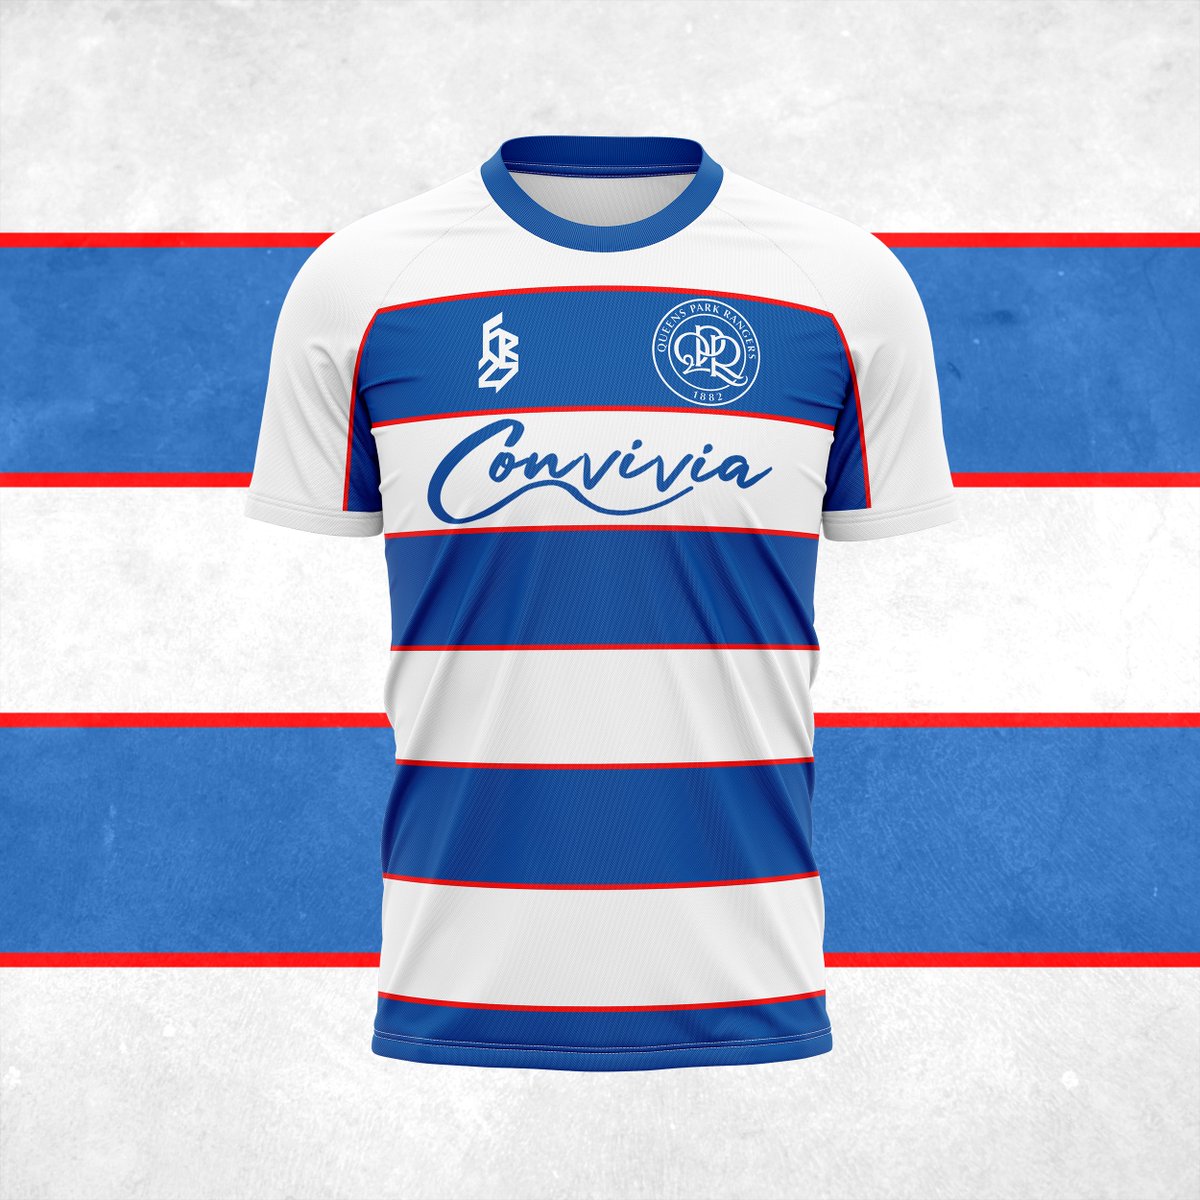 After the positive feedback on yesterday’s kits the main request was to basically flip the hoops
I had to recreate the design from scratch so here is the original hoops version vs the new hoops version

Which do you prefer?

#QPR @QPR #FootballKits #Footballkitdesign #smsports